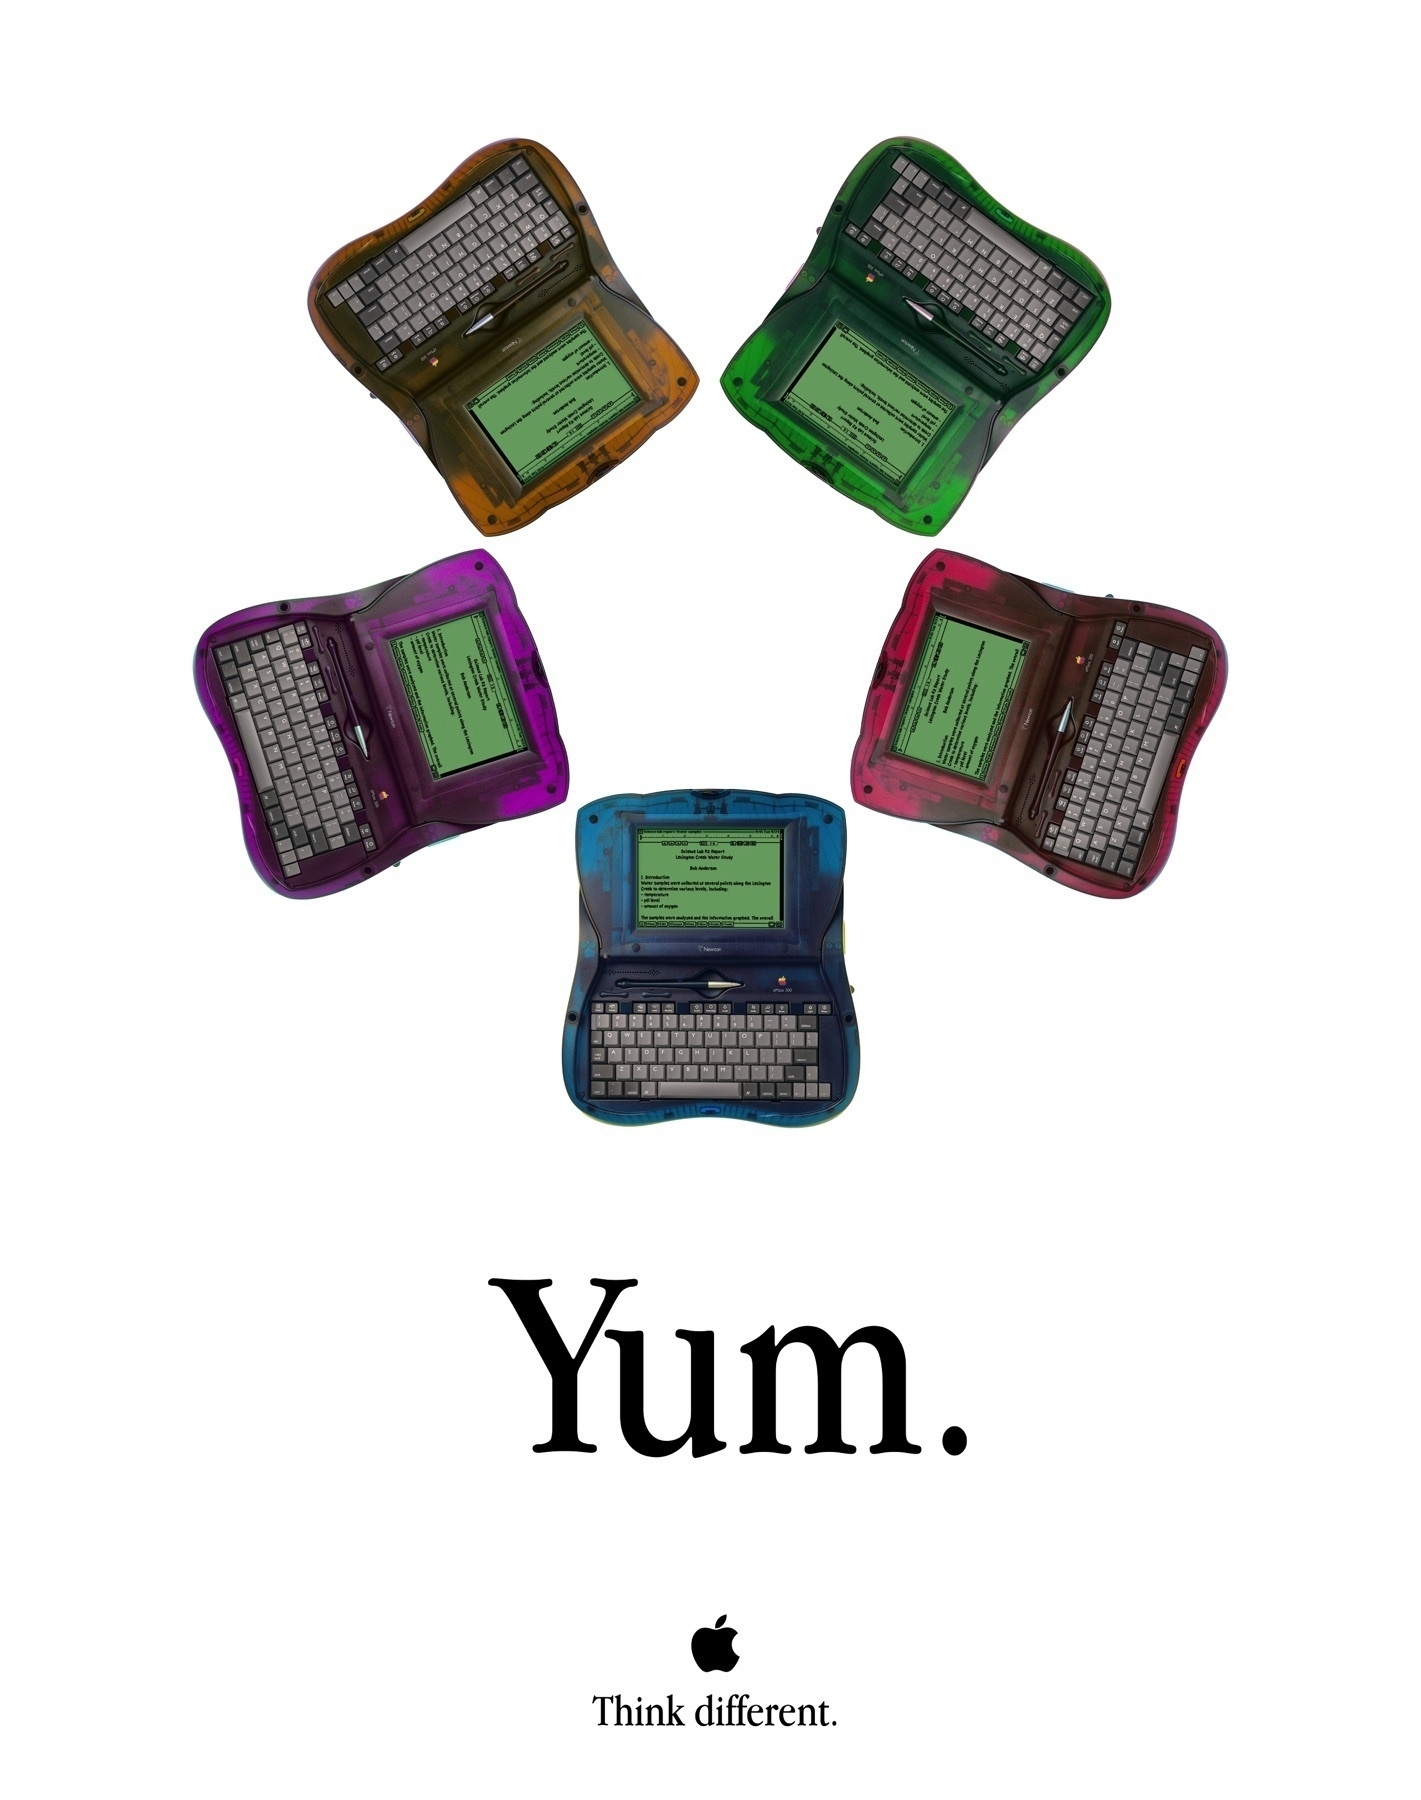 Five brightly colored eMate 300 in the iMac five color poster design with the title “Yum.” followed by the Apple logo and “Think different.”